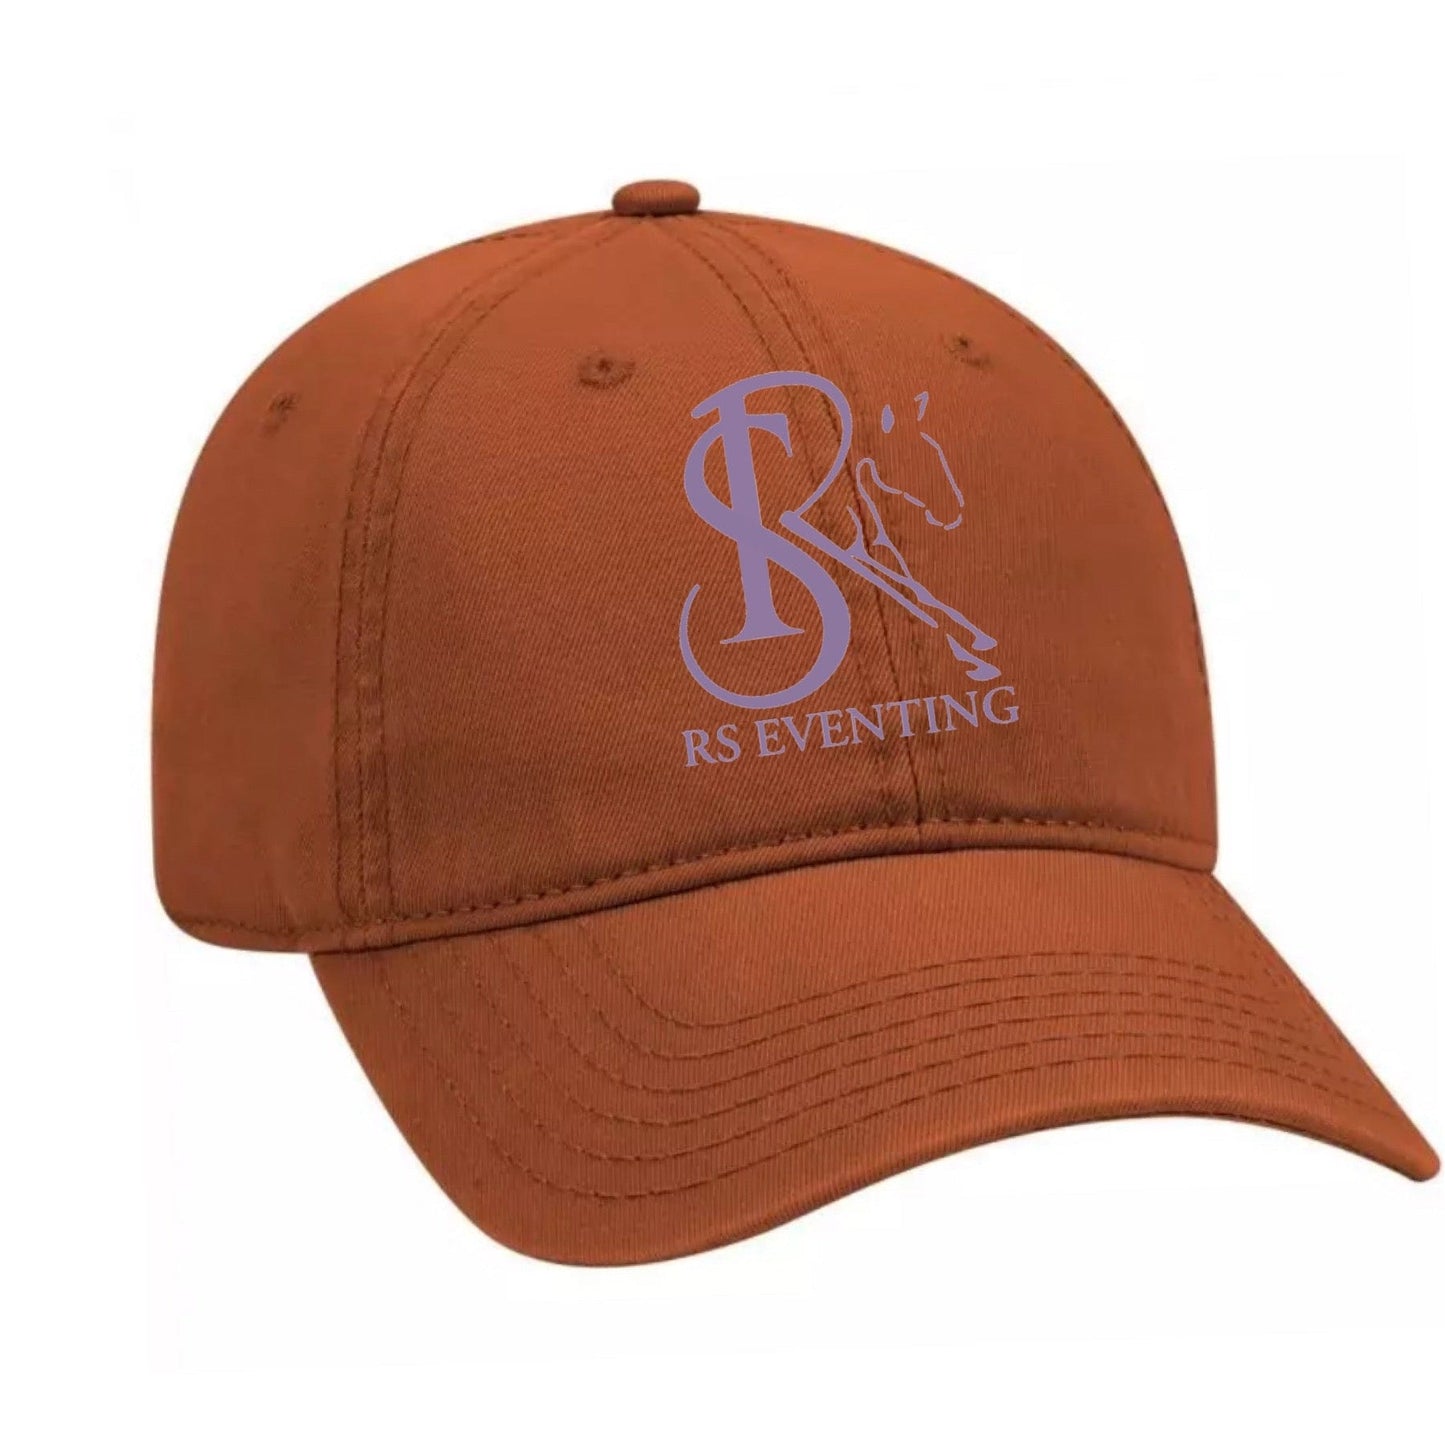 Equestrian Team Apparel RS Eventing Baseball Cap equestrian team apparel online tack store mobile tack store custom farm apparel custom show stable clothing equestrian lifestyle horse show clothing riding clothes horses equestrian tack store